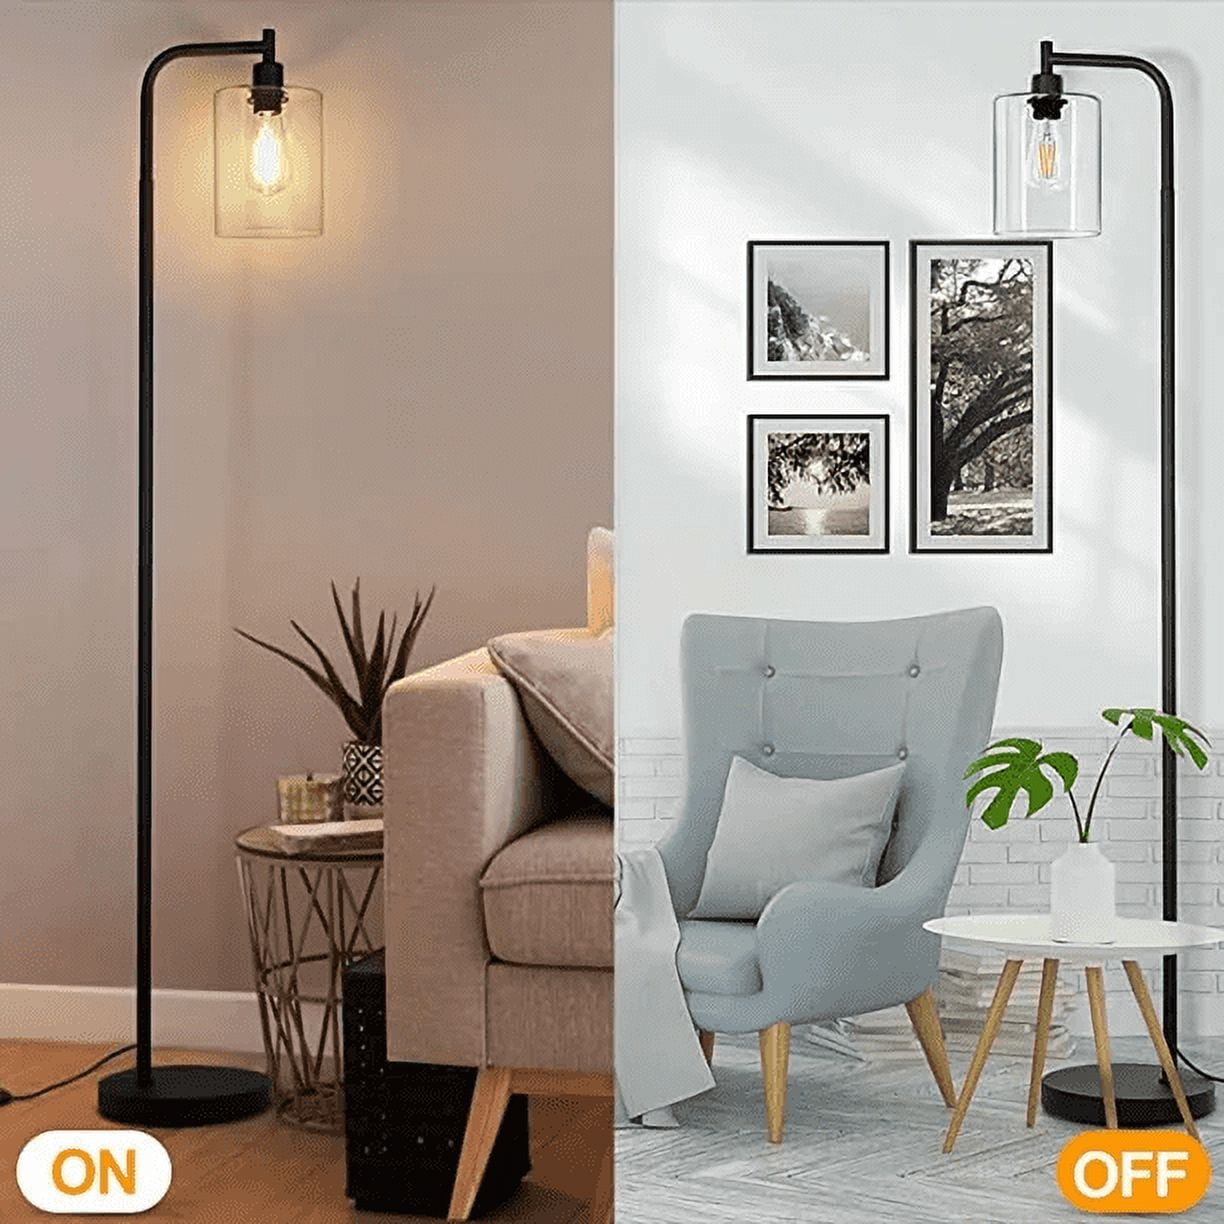 Housiwill Floor Lamp With Glass